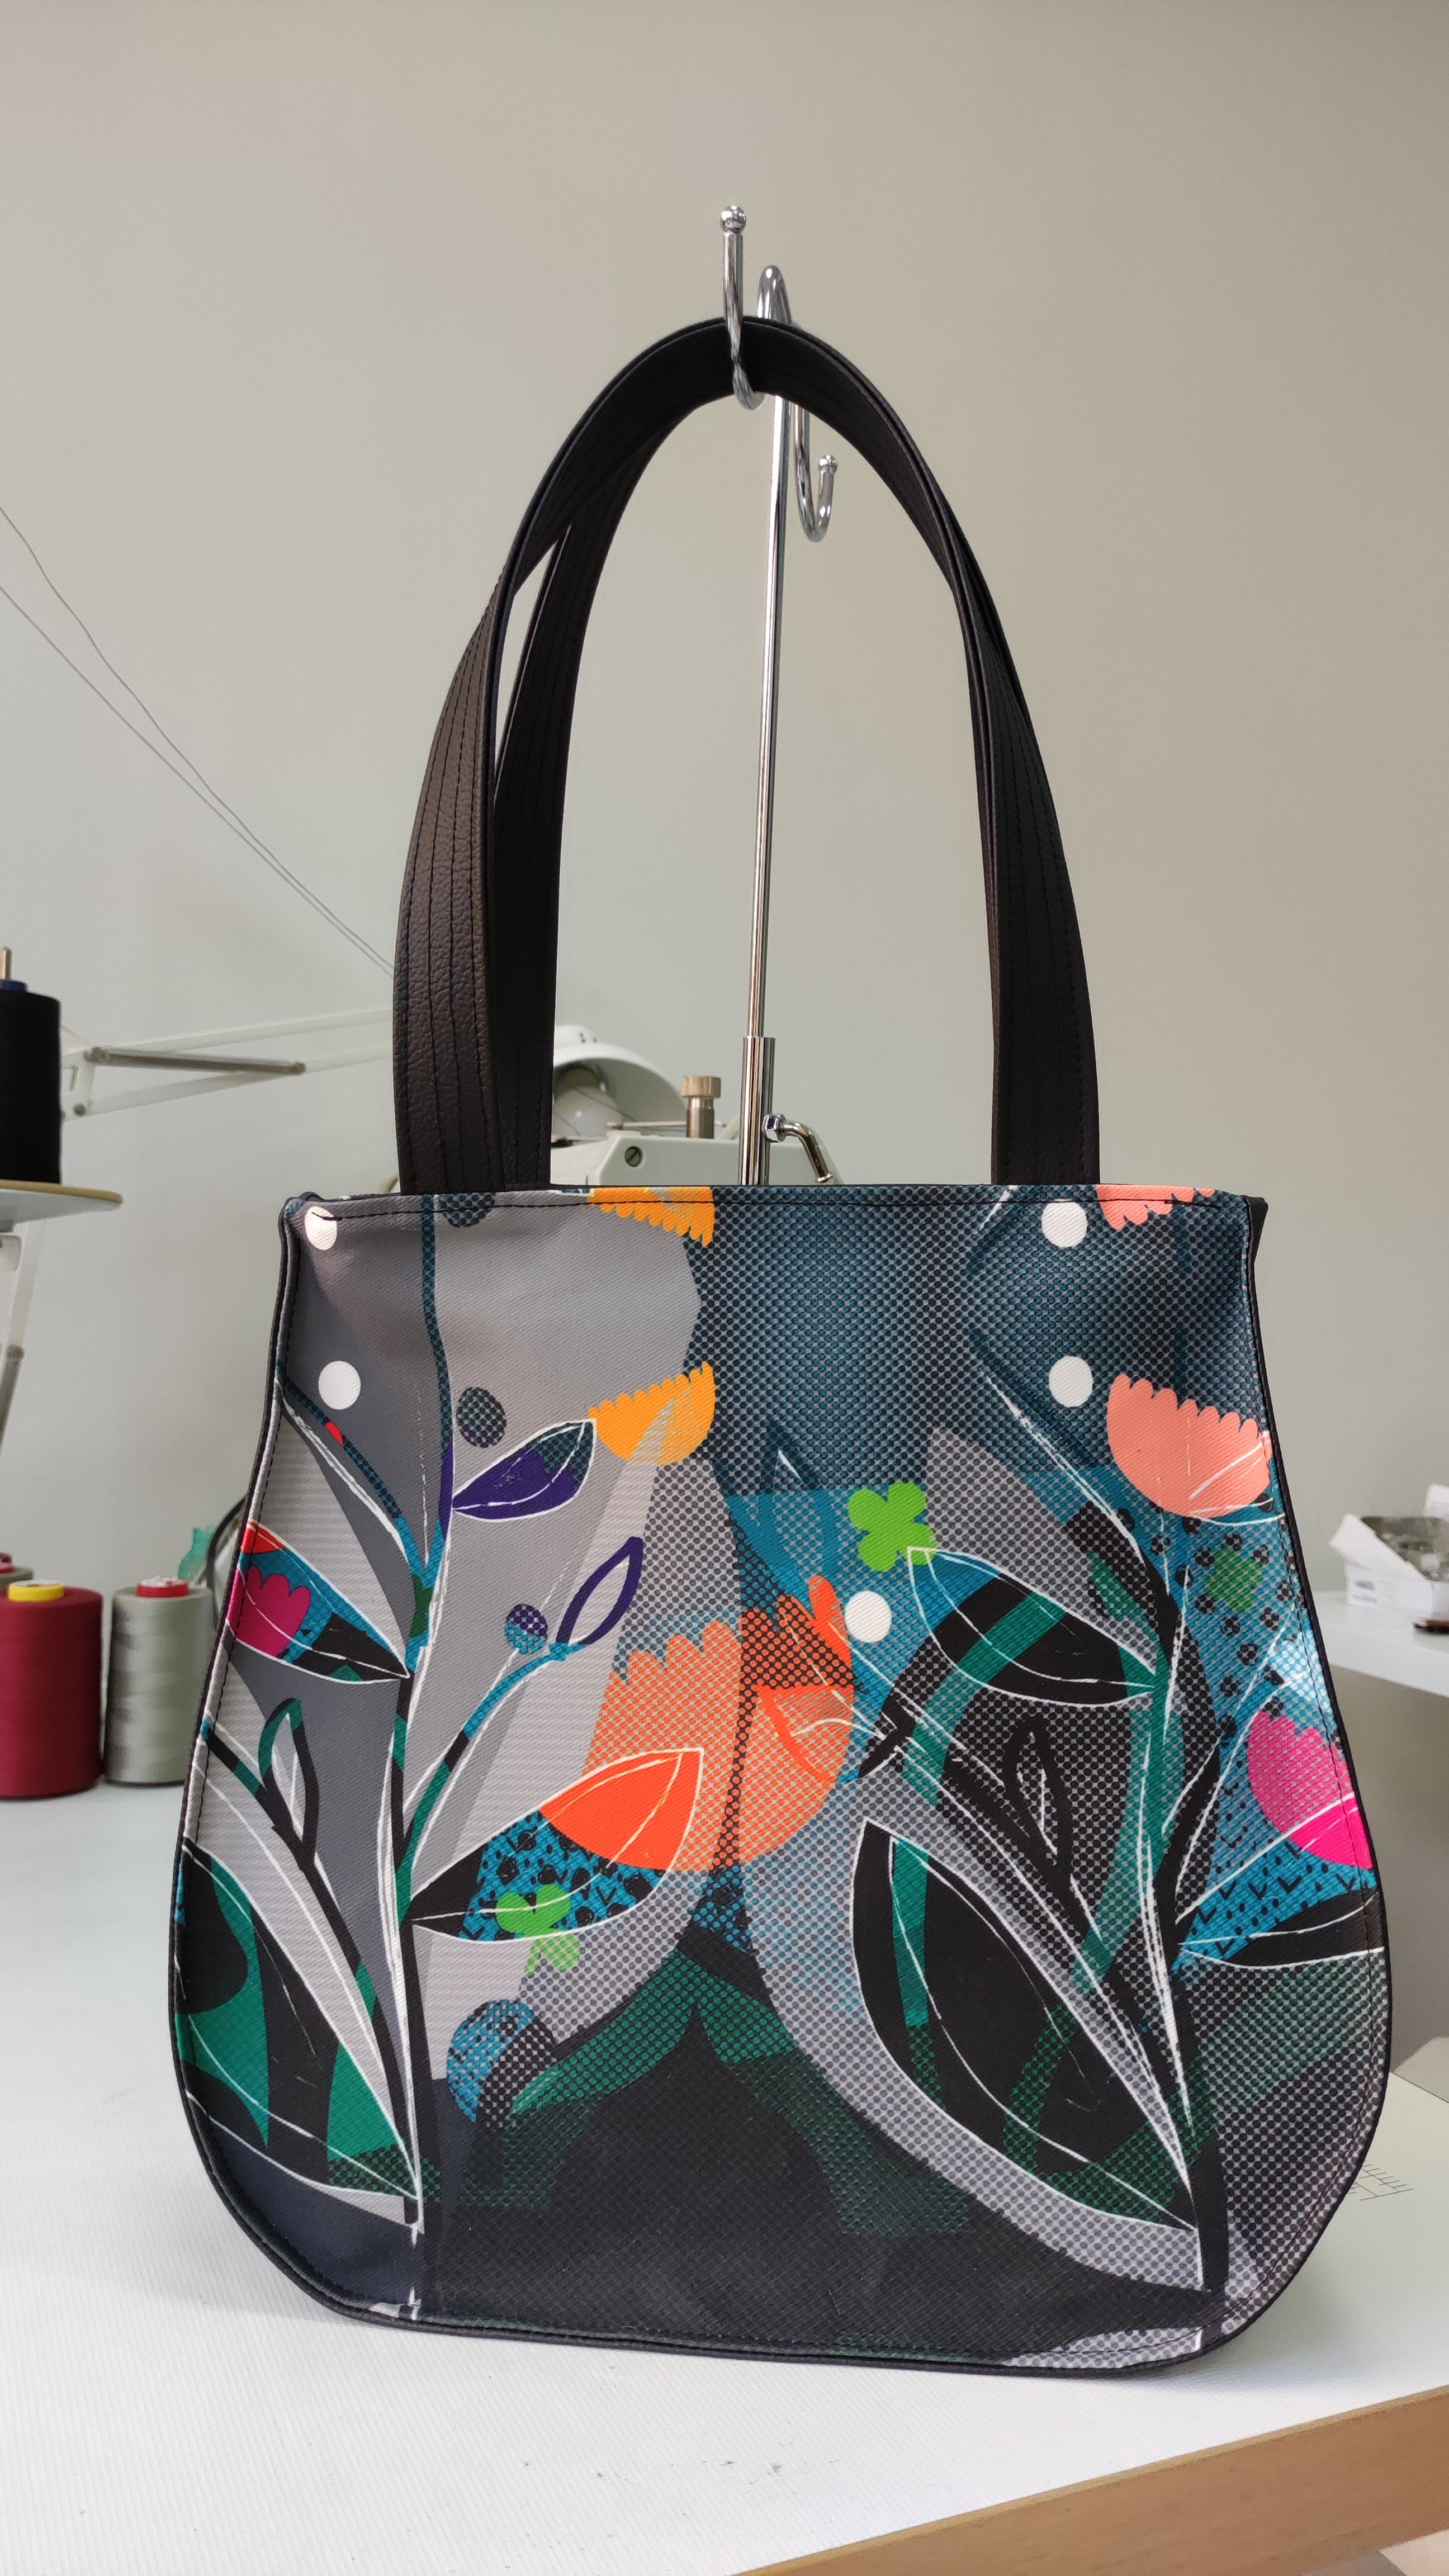 Bardo style bag - Waiting for the dawn - Premium style bag from BARDO ART WORKS - Just lvabstract, black, blue, floral, handemade, nocturne, pink, summer69.00! Shop now at BARDO ART WORKS